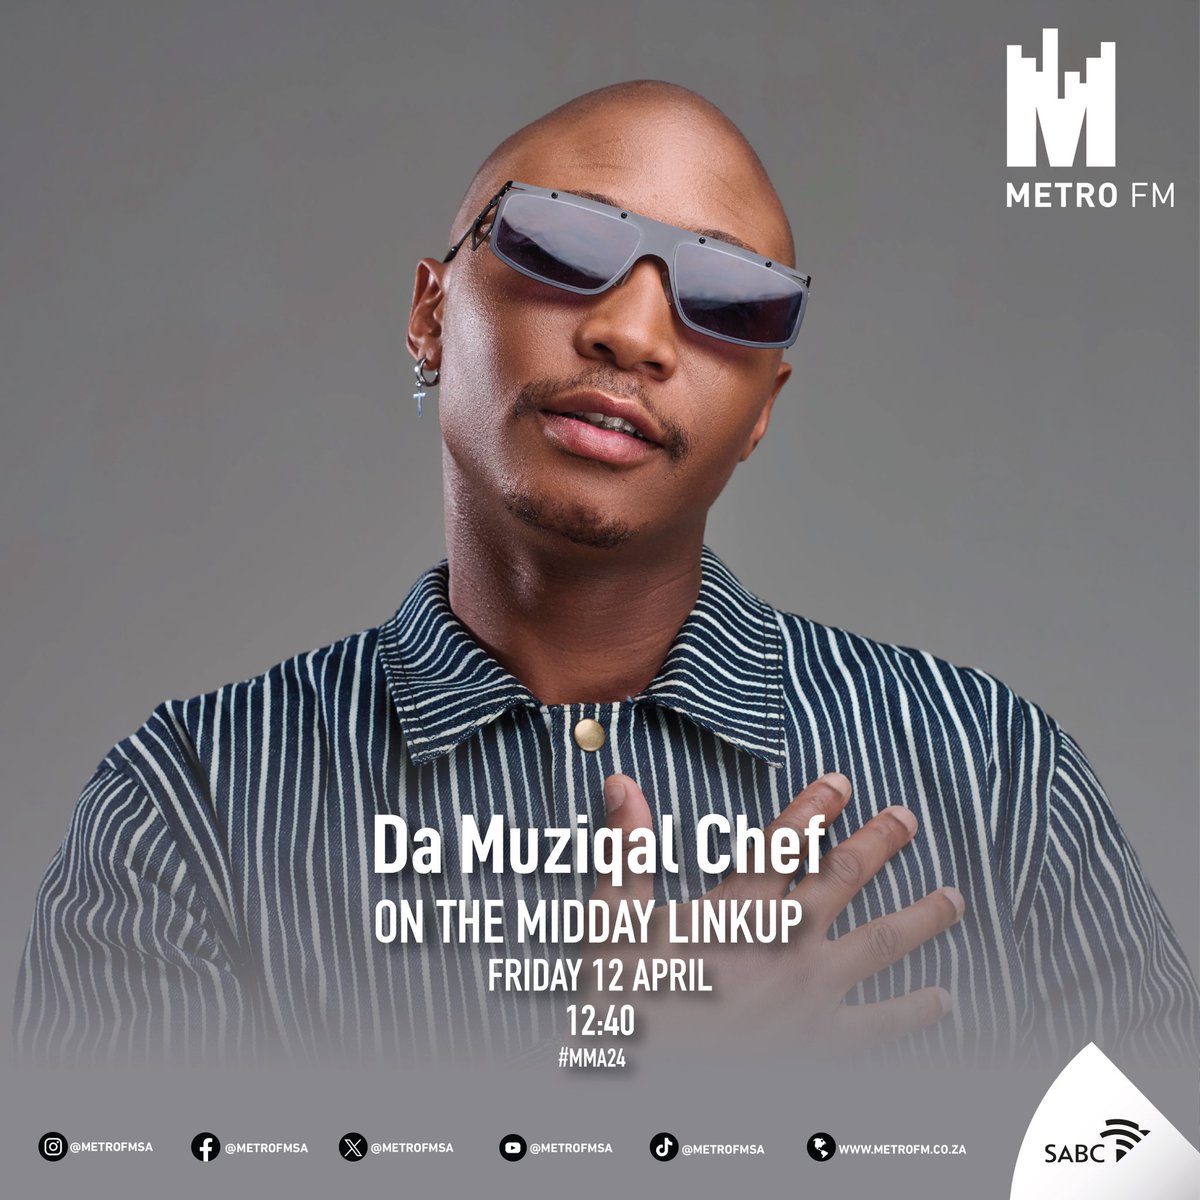 We are joined by #MMA24 nominees for ‘Song Of The Year ’ Damuziqalchef and @DeMthudaSA on #TheMiddayLinkUp at 12:40. To vote, dial *120*45787# | USSD rates charged at R1.50 per minute. #MMA24 #BlackToTheFuture